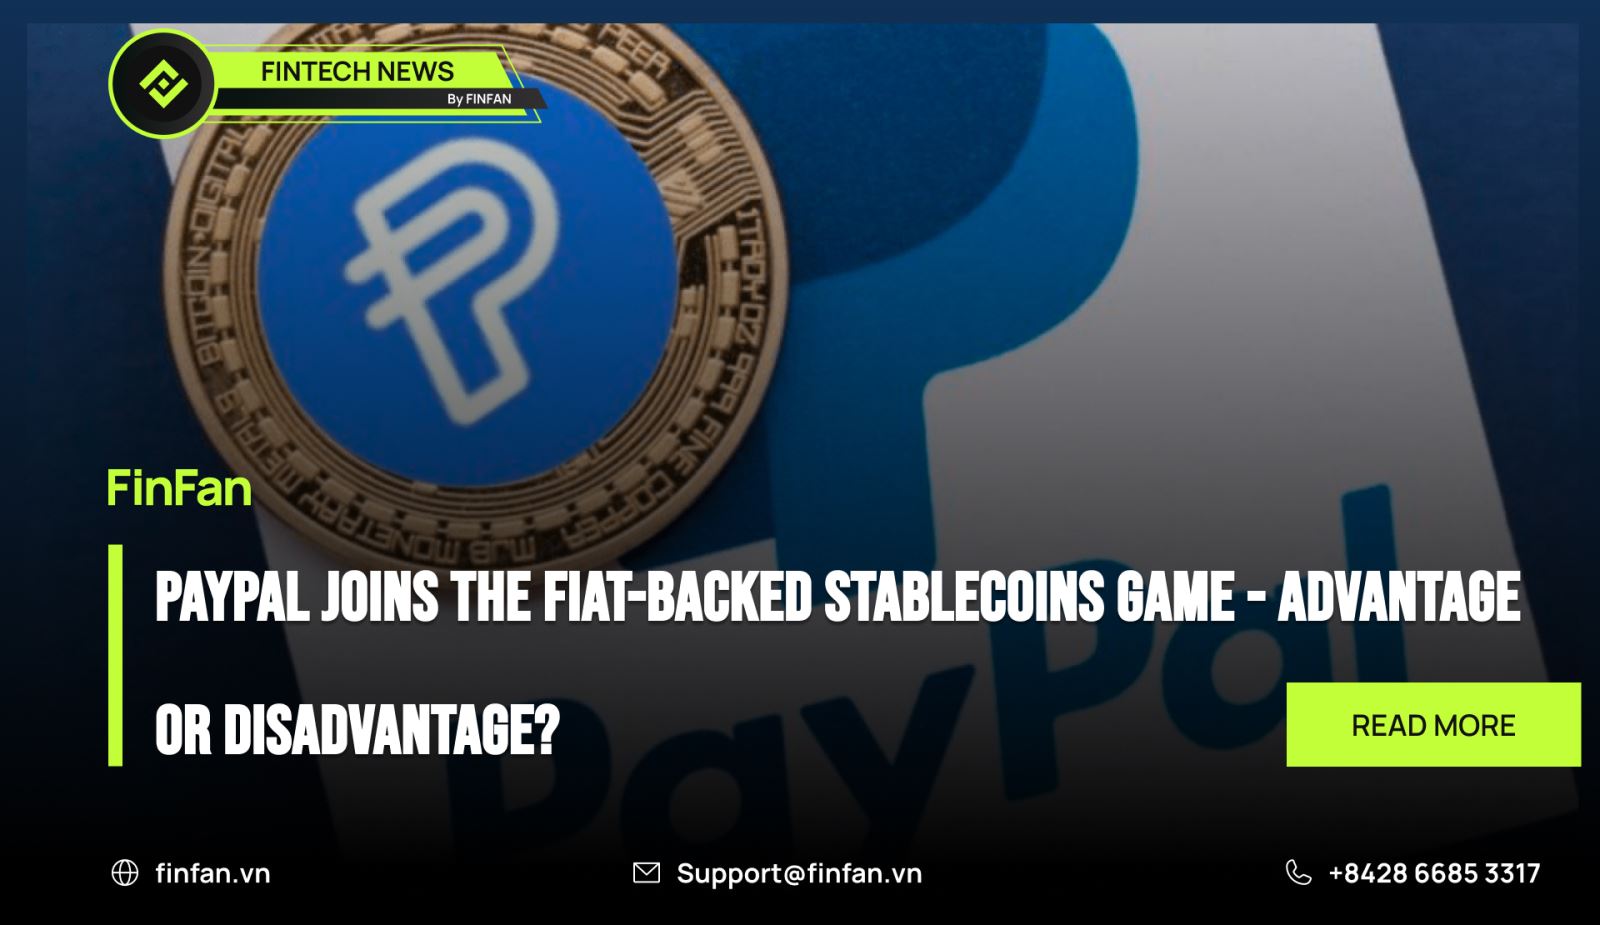 PayPal joins the fiat-backed stablecoins game  - Advantage or disadvantage?